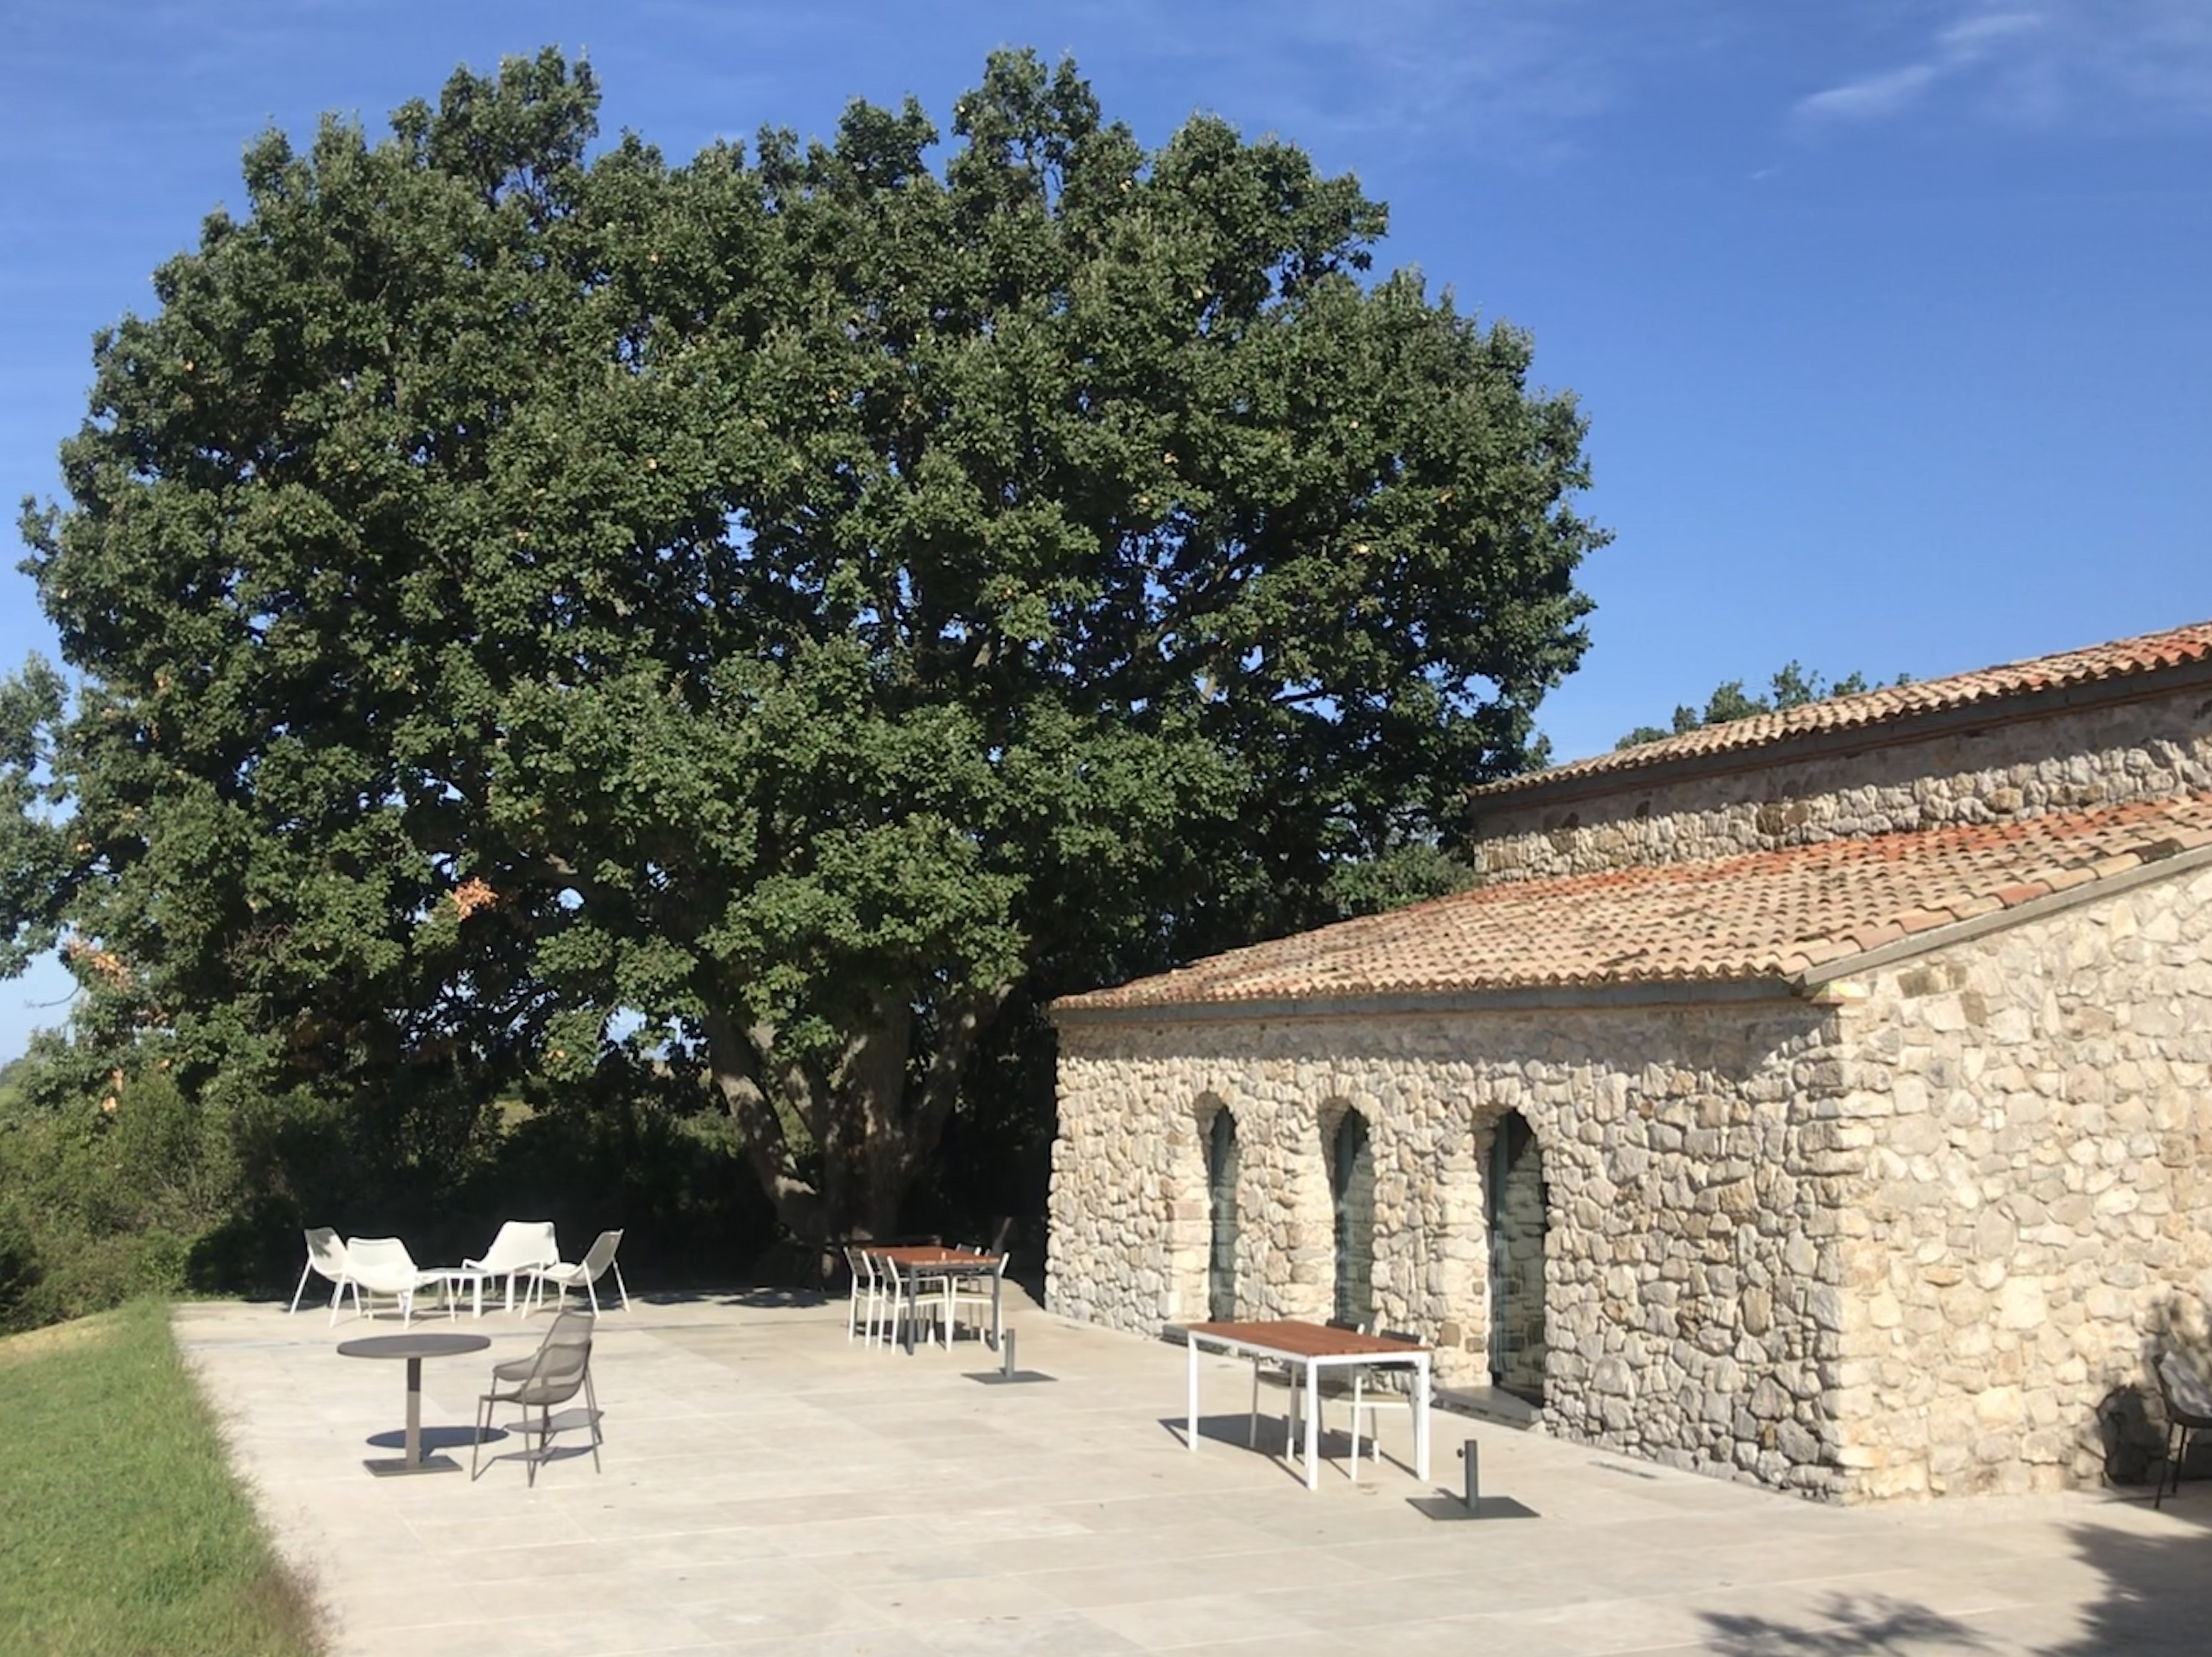 The main building with the oak, that became the symbol of the resort